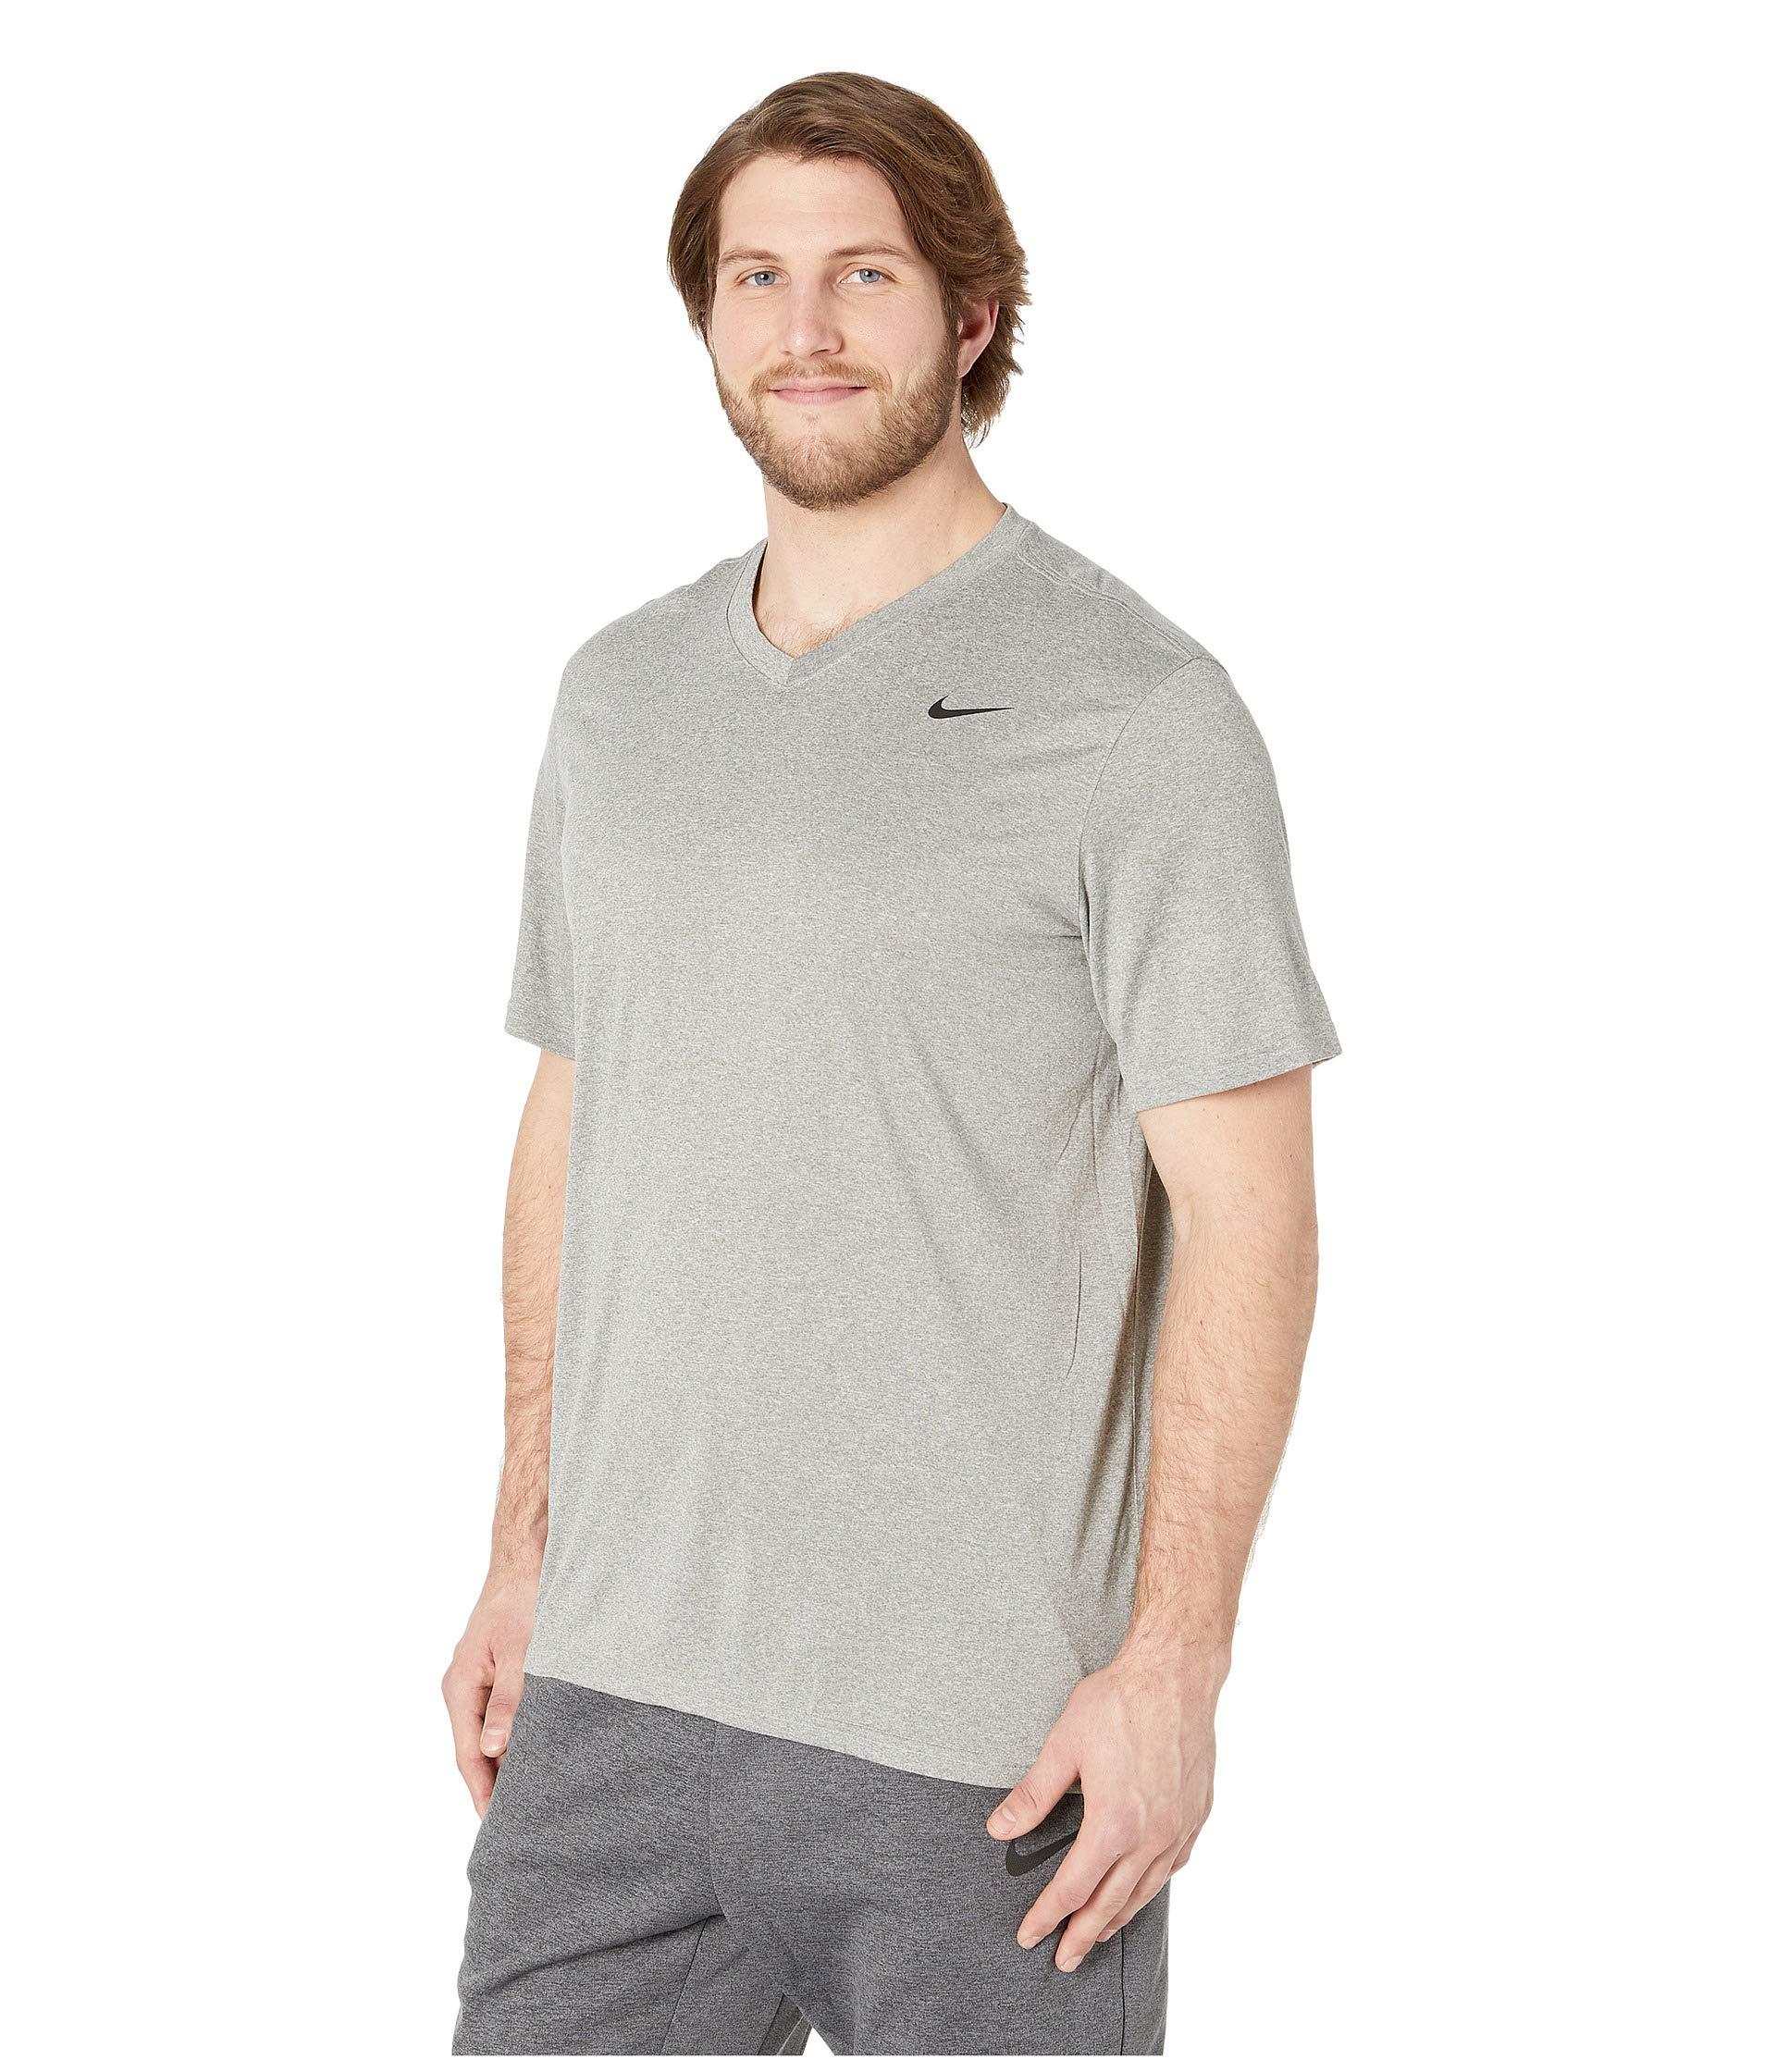 Nike Synthetic Big Tall Dry Tee Legend V-neck 2.0 in Dark Grey Heather ...